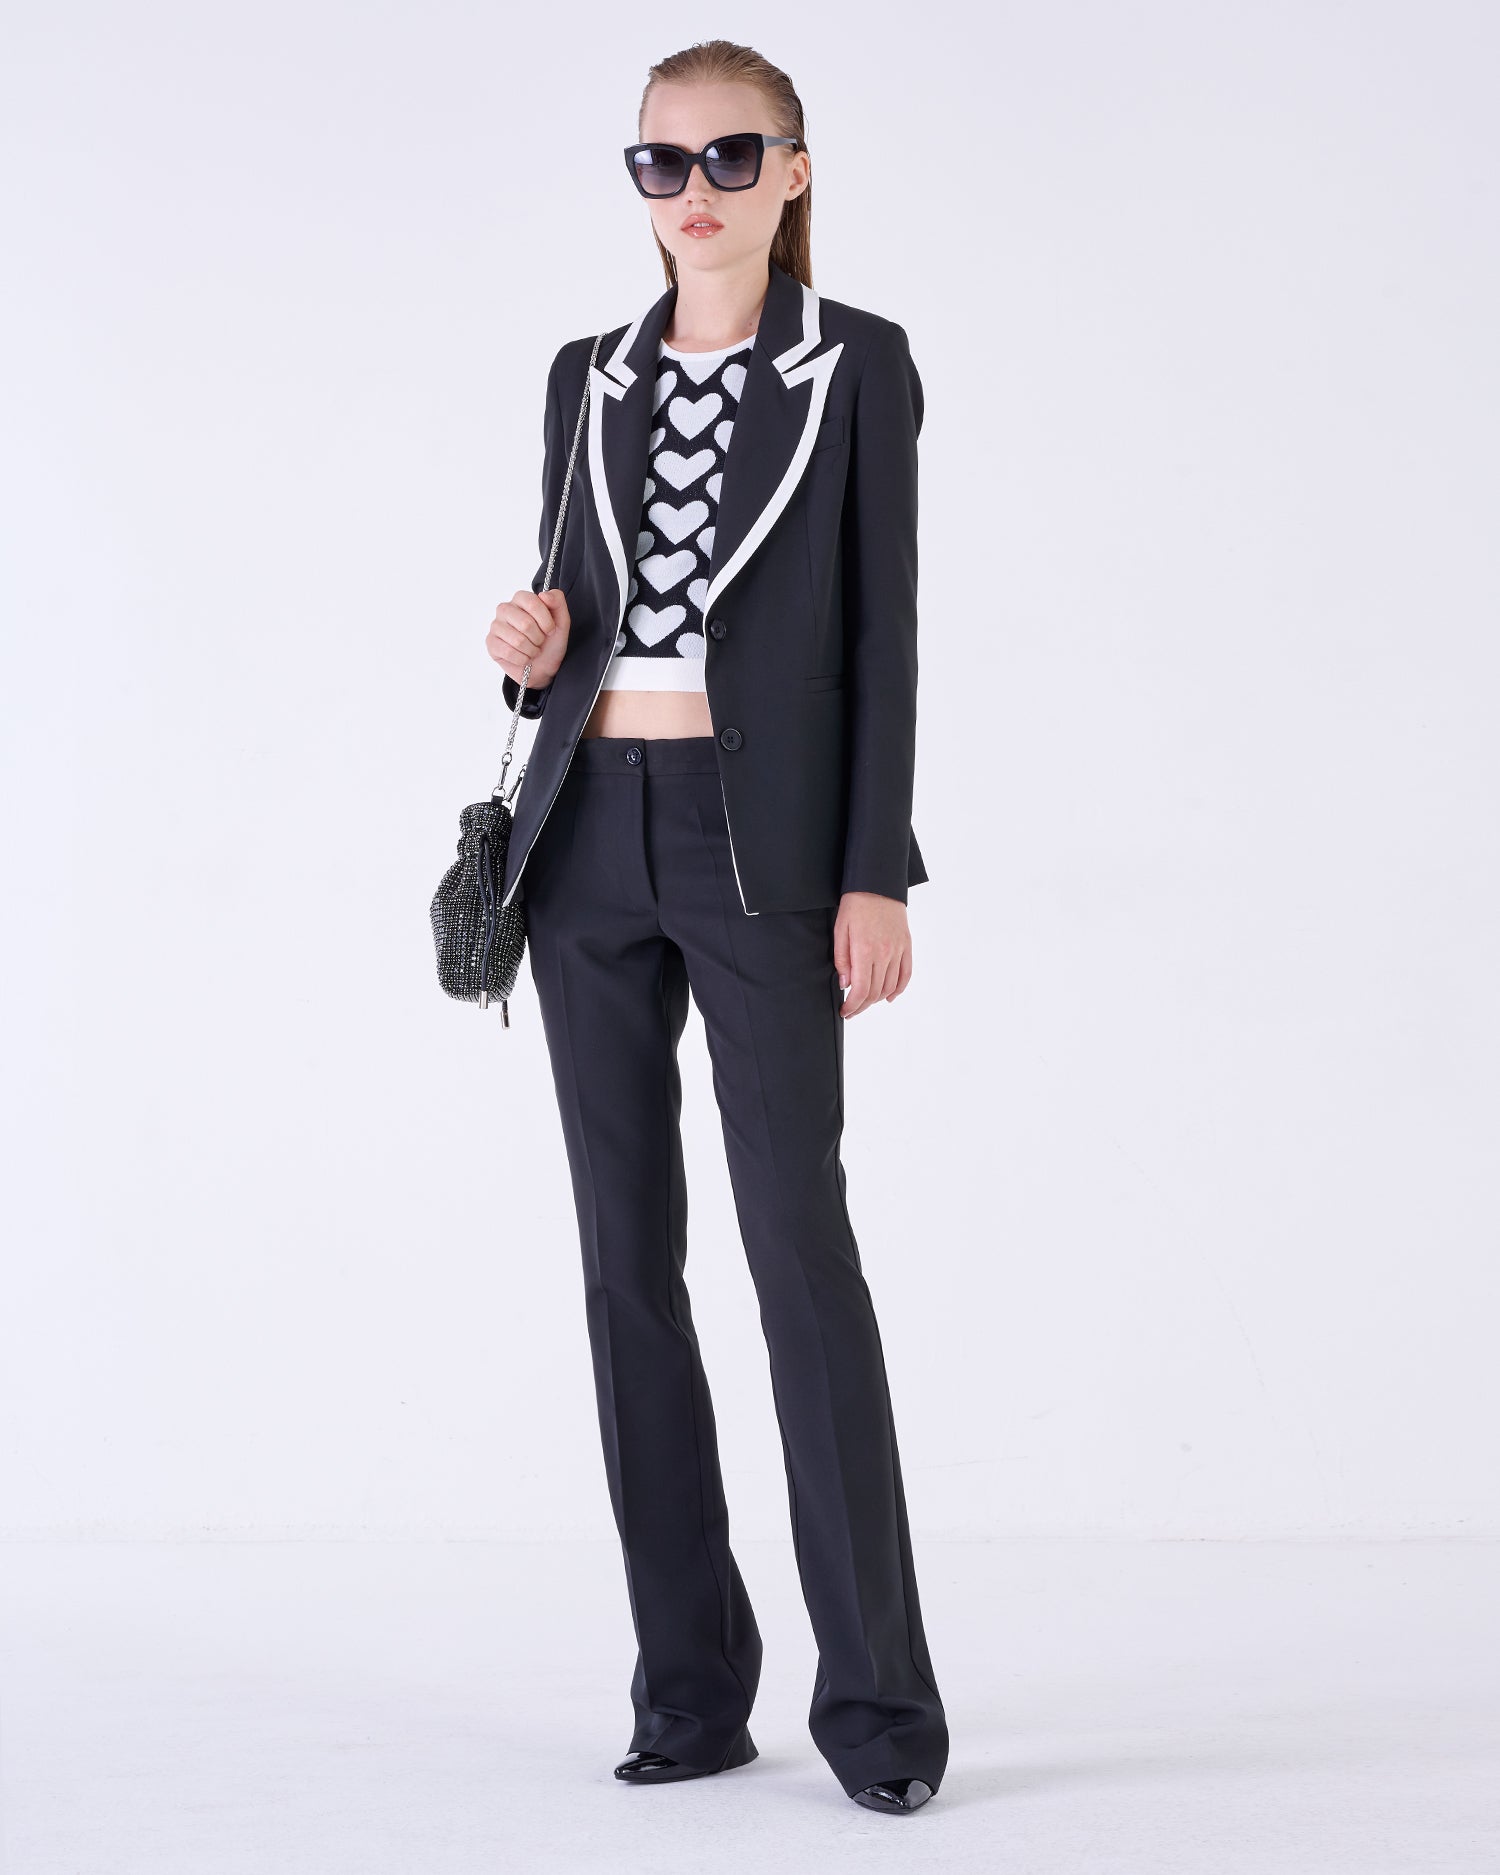 Blazer and trousers suit